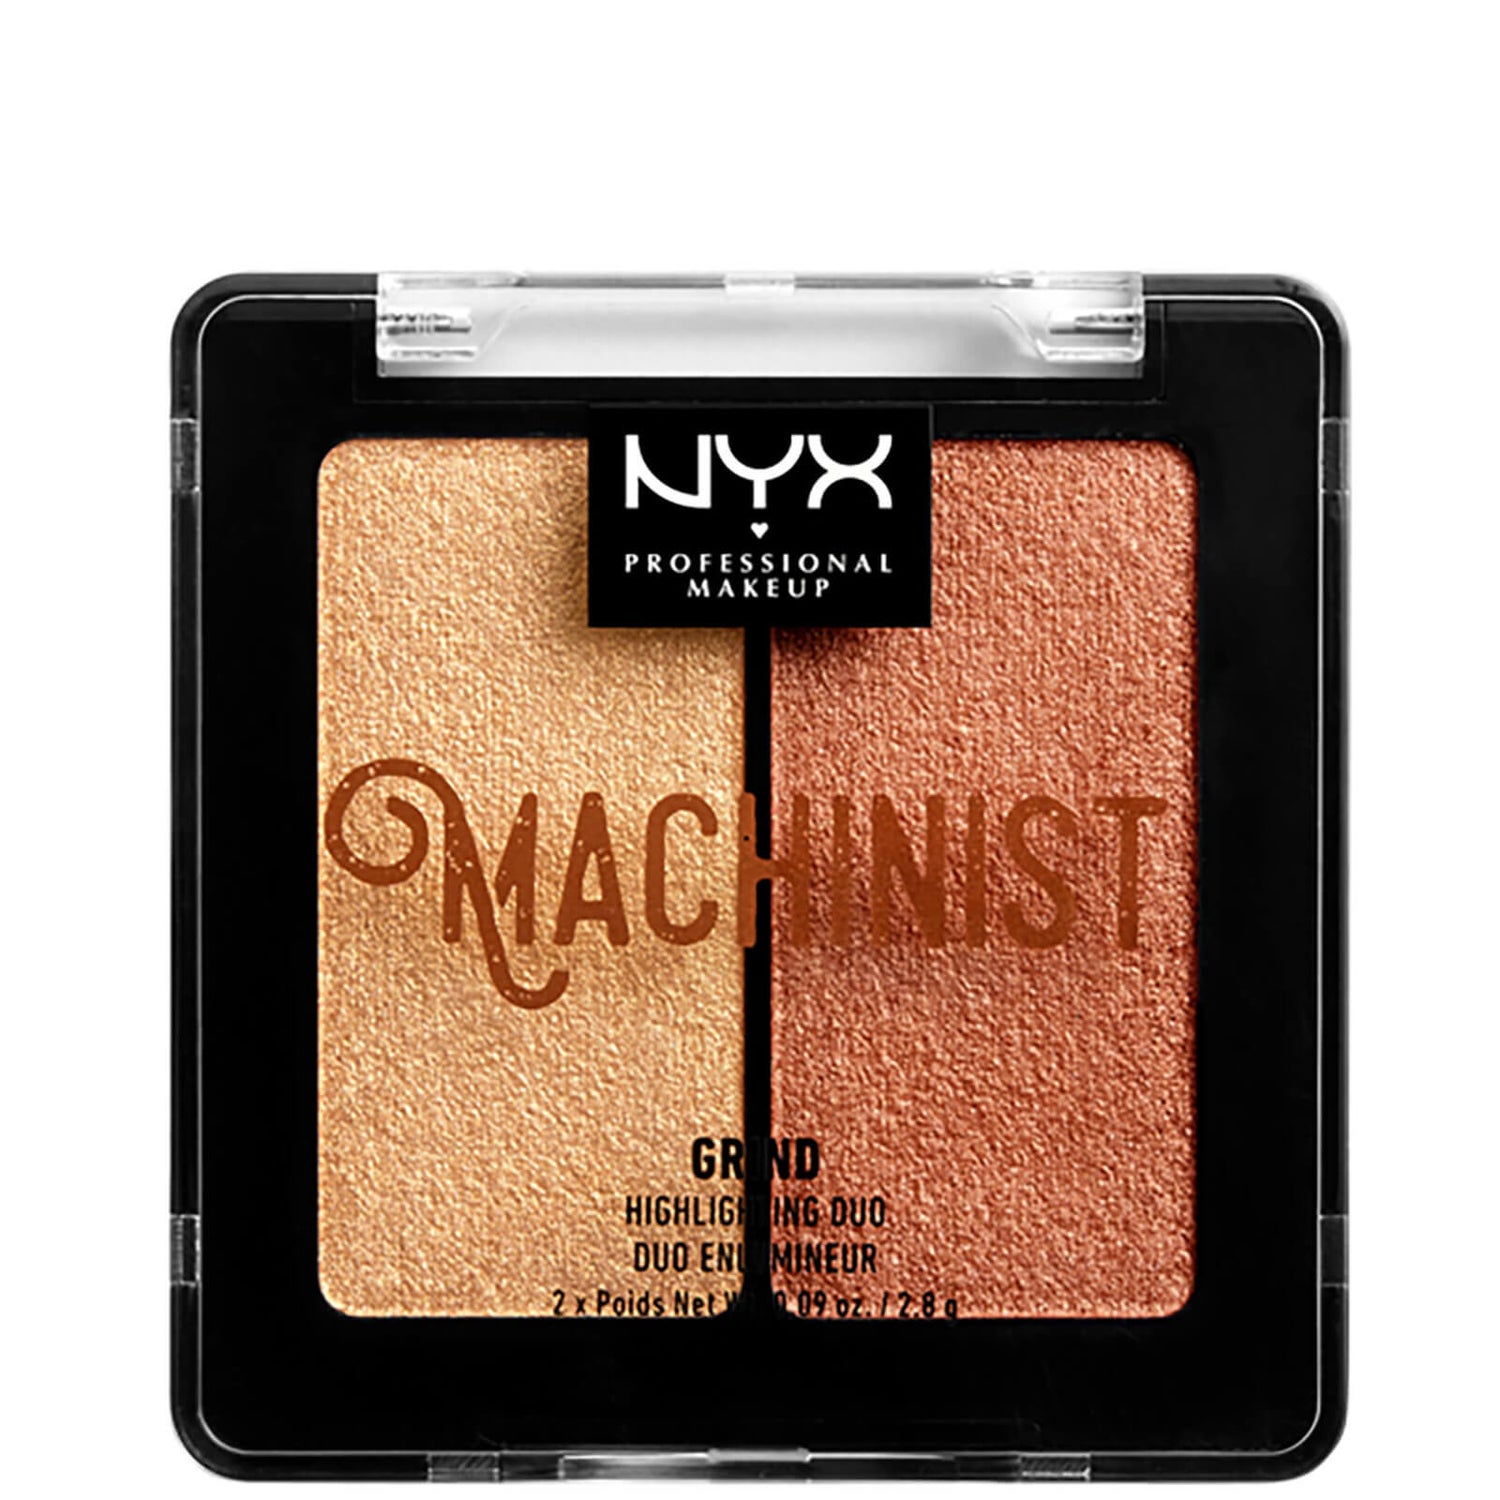 NYX Professional Makeup Machinist Highlighter Duo Kit - Grind